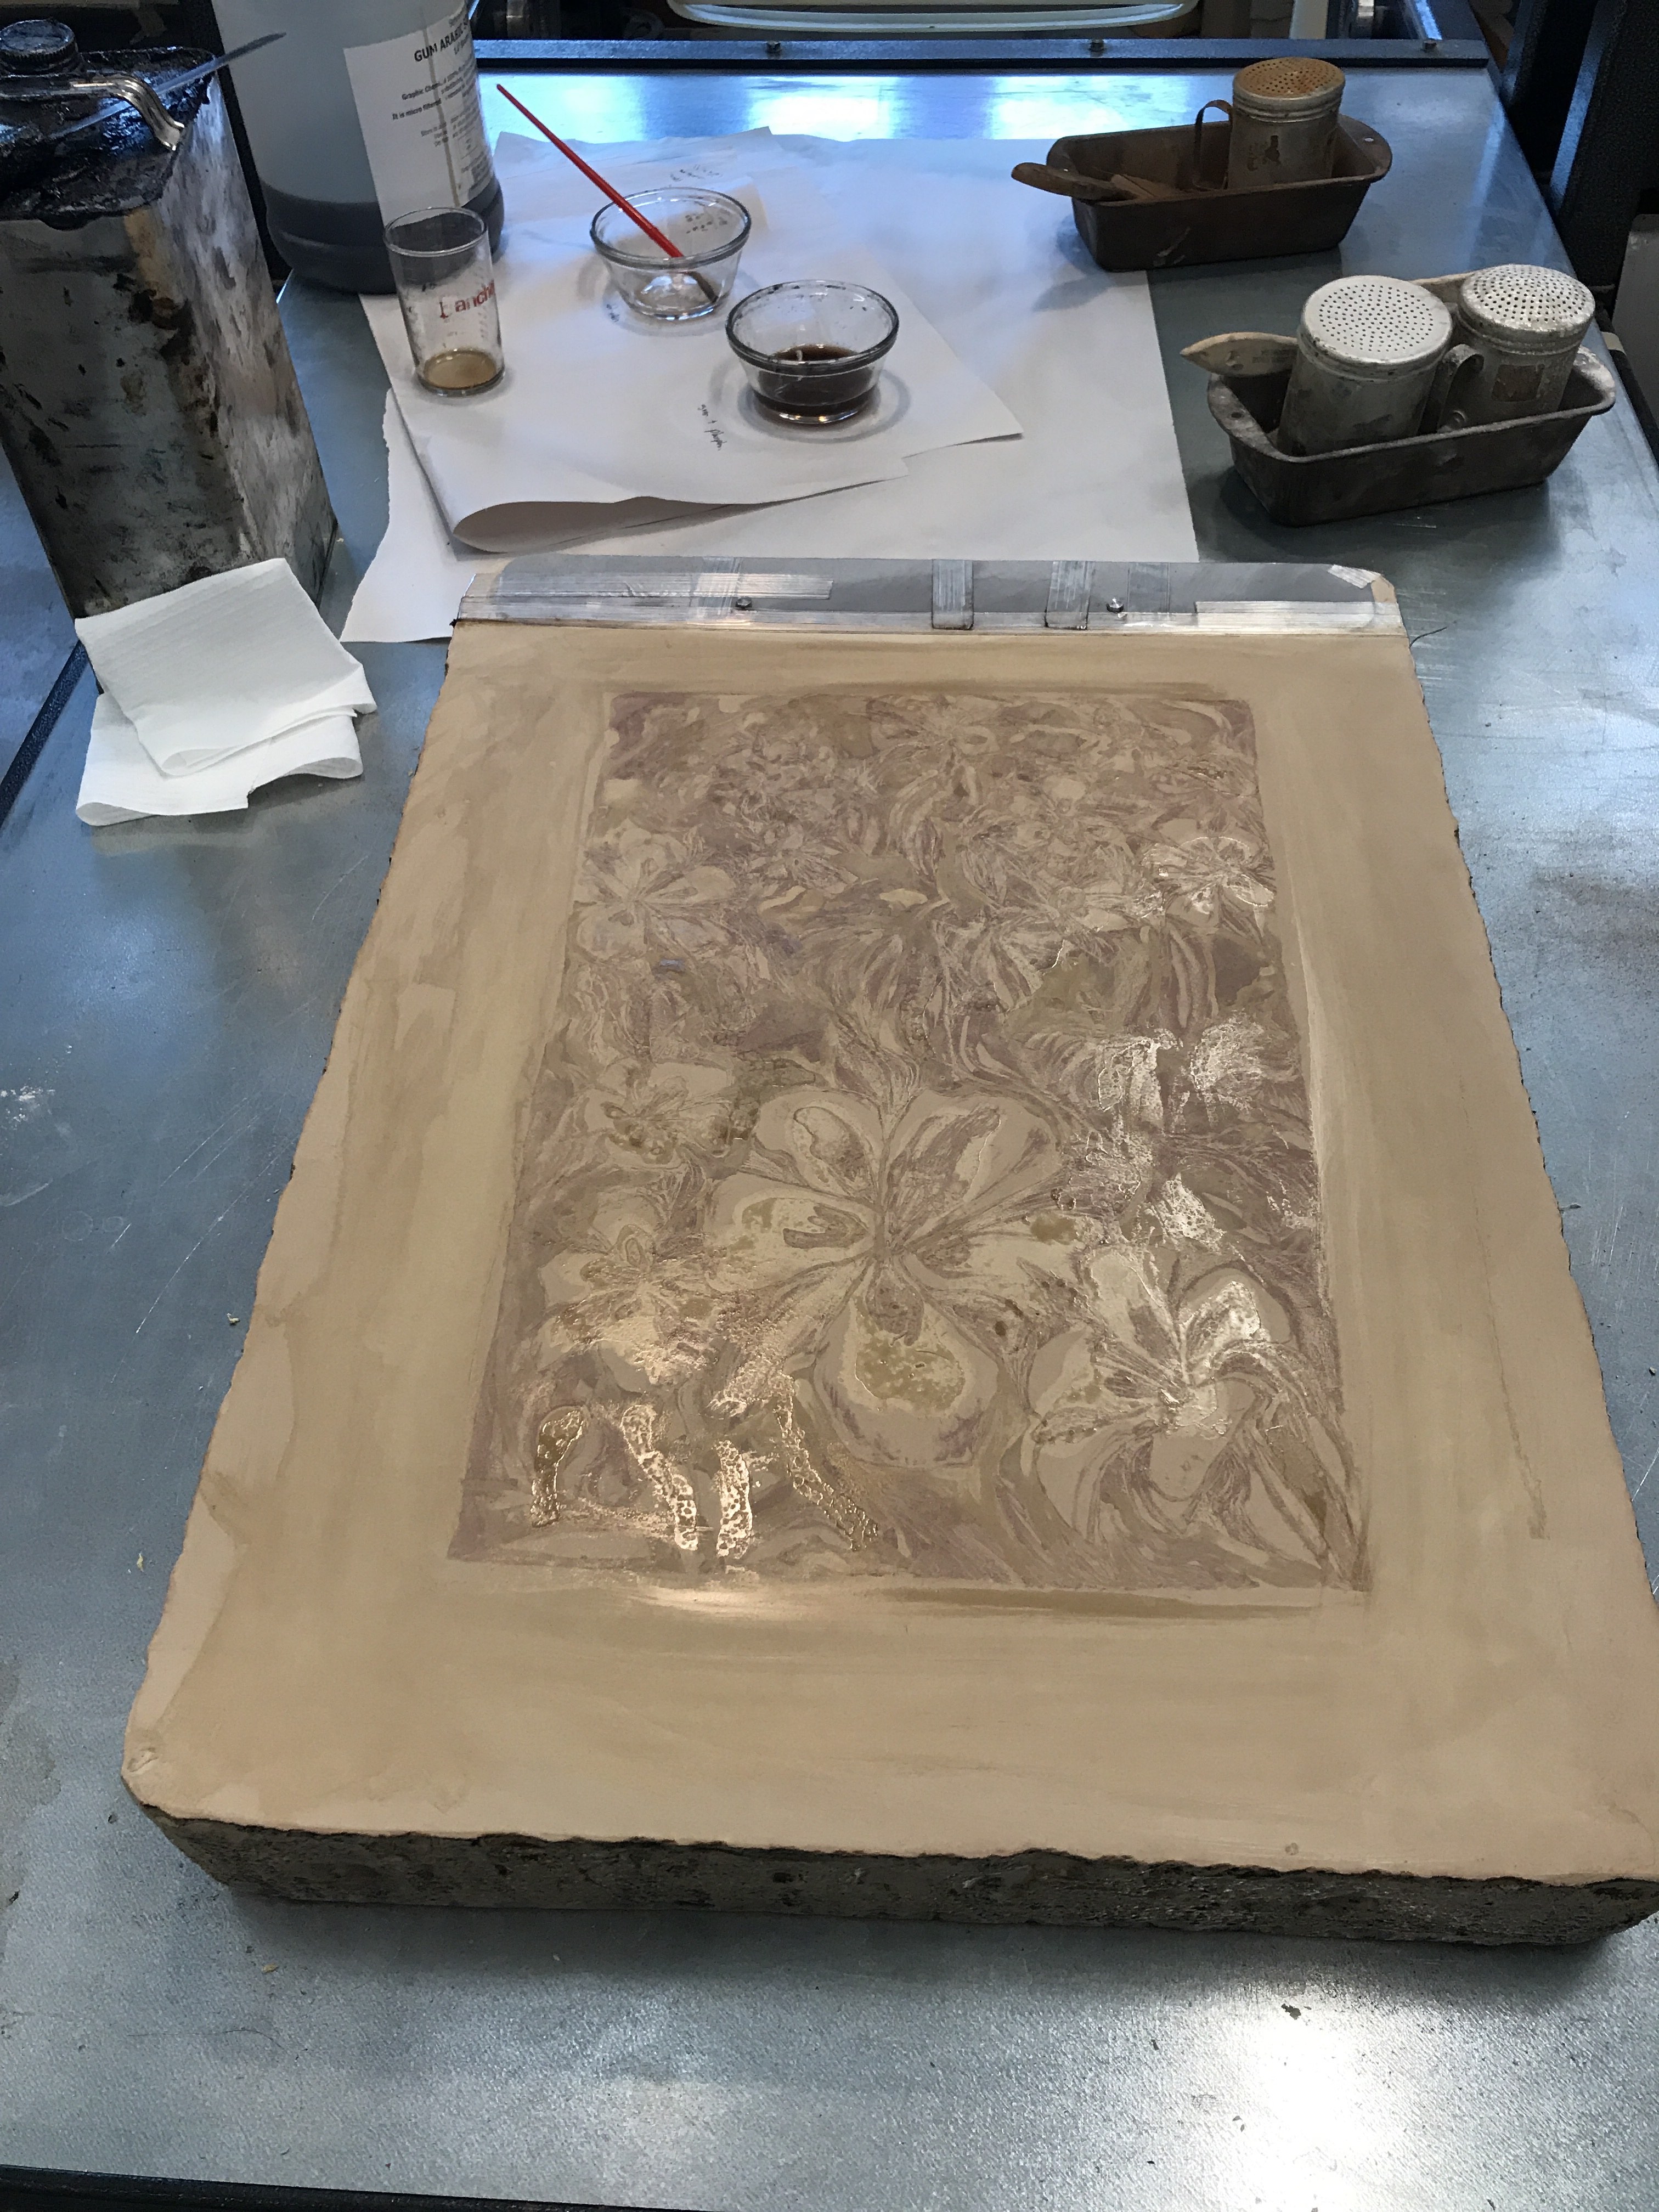 Lithography Stone in the Process of Being Washed Out